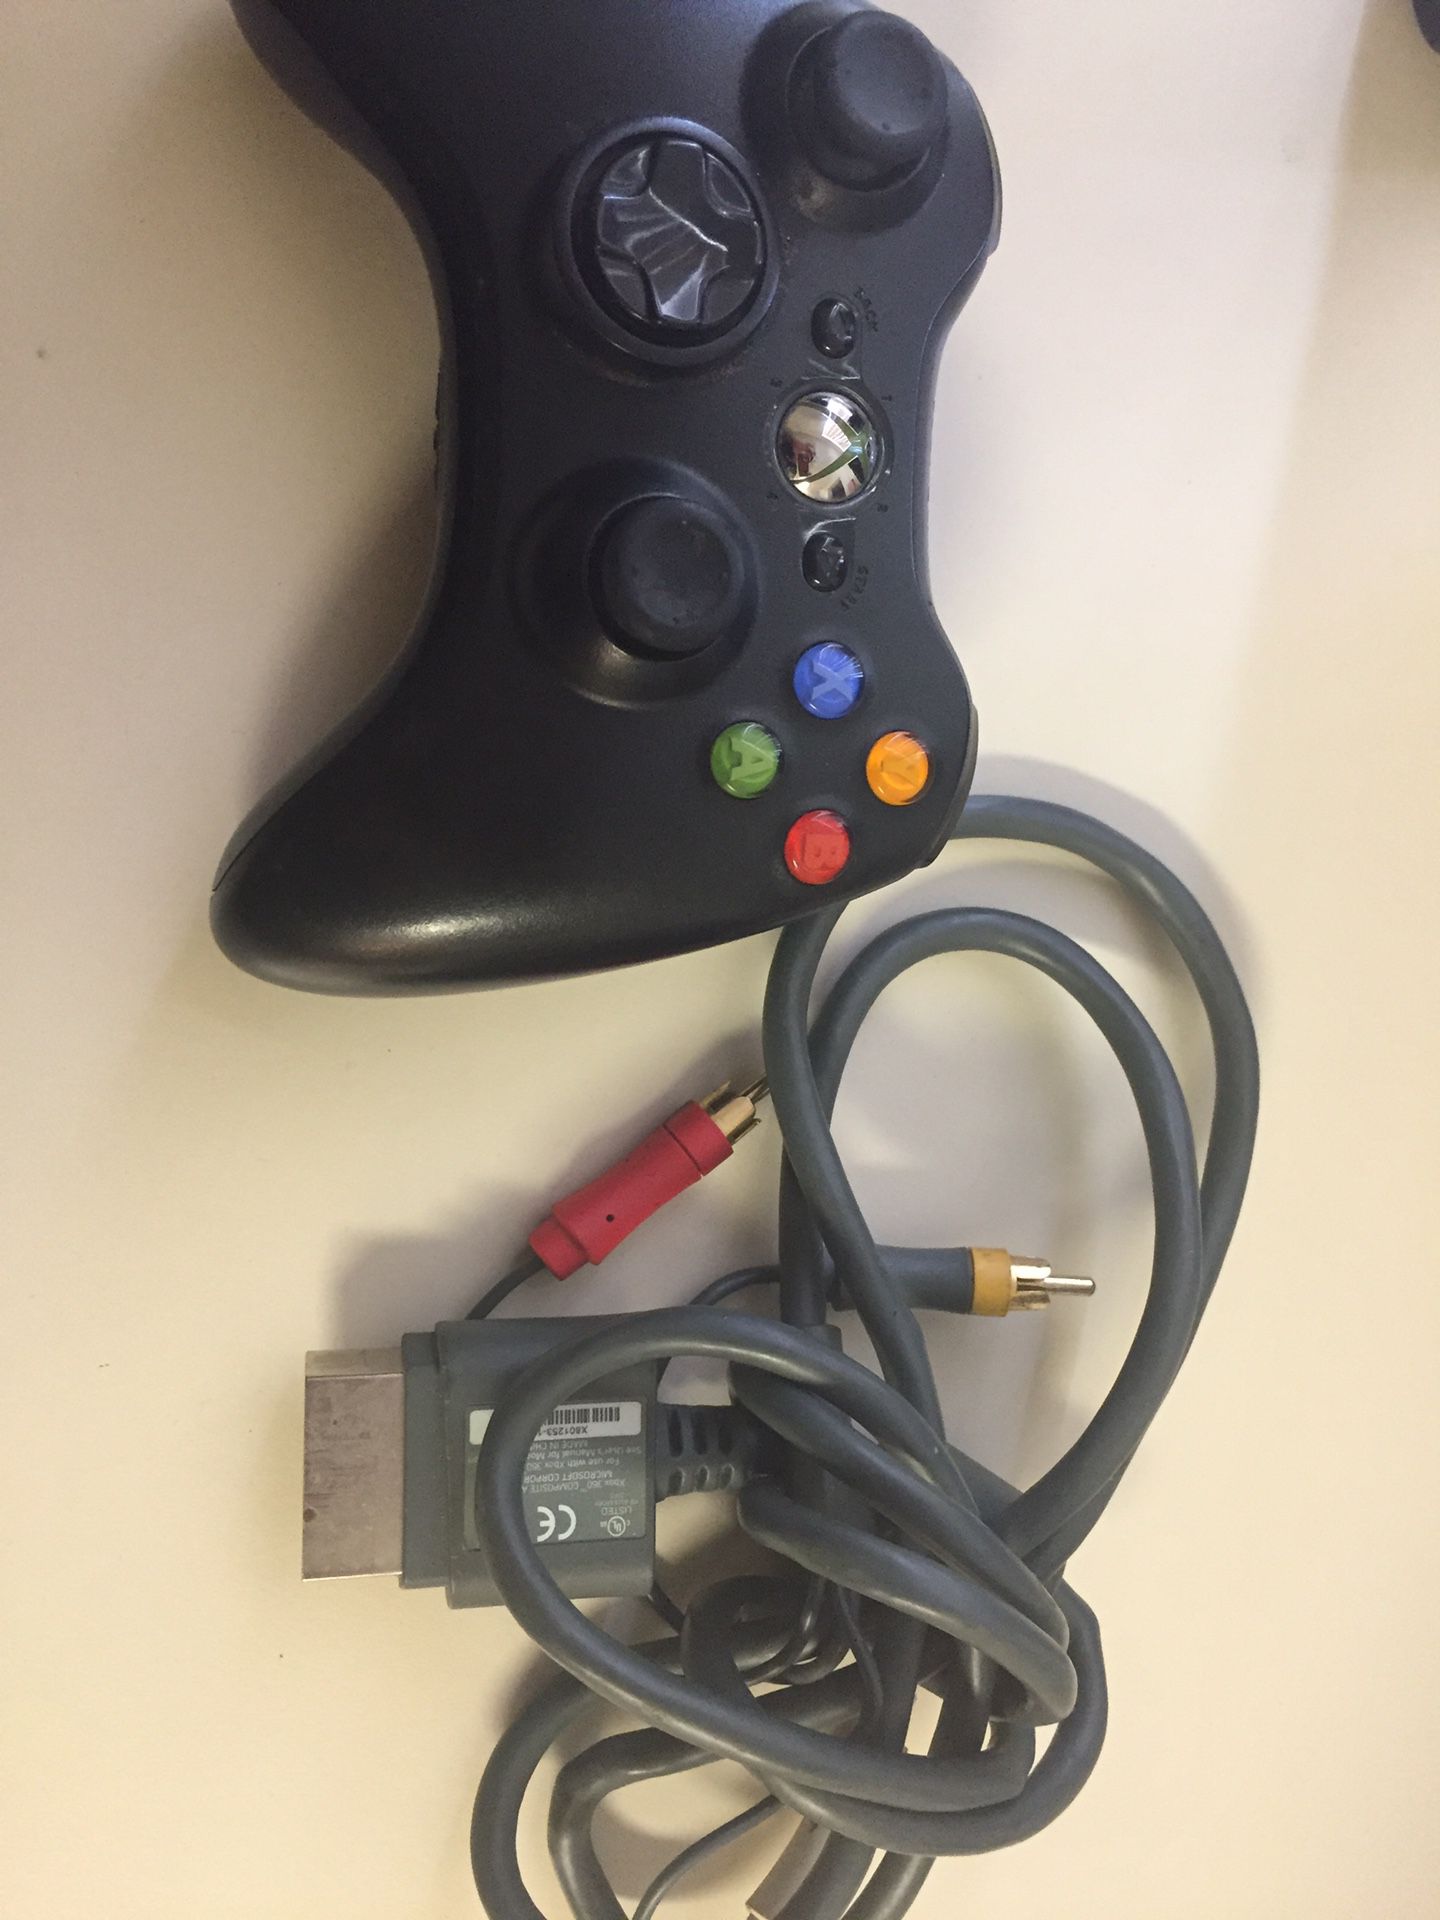 XBOX 360 CONTROLLER ThaPLEASE READ CONTROLLER NEEDS A BATTERY PACK AND COMES WITH CORD both for $10